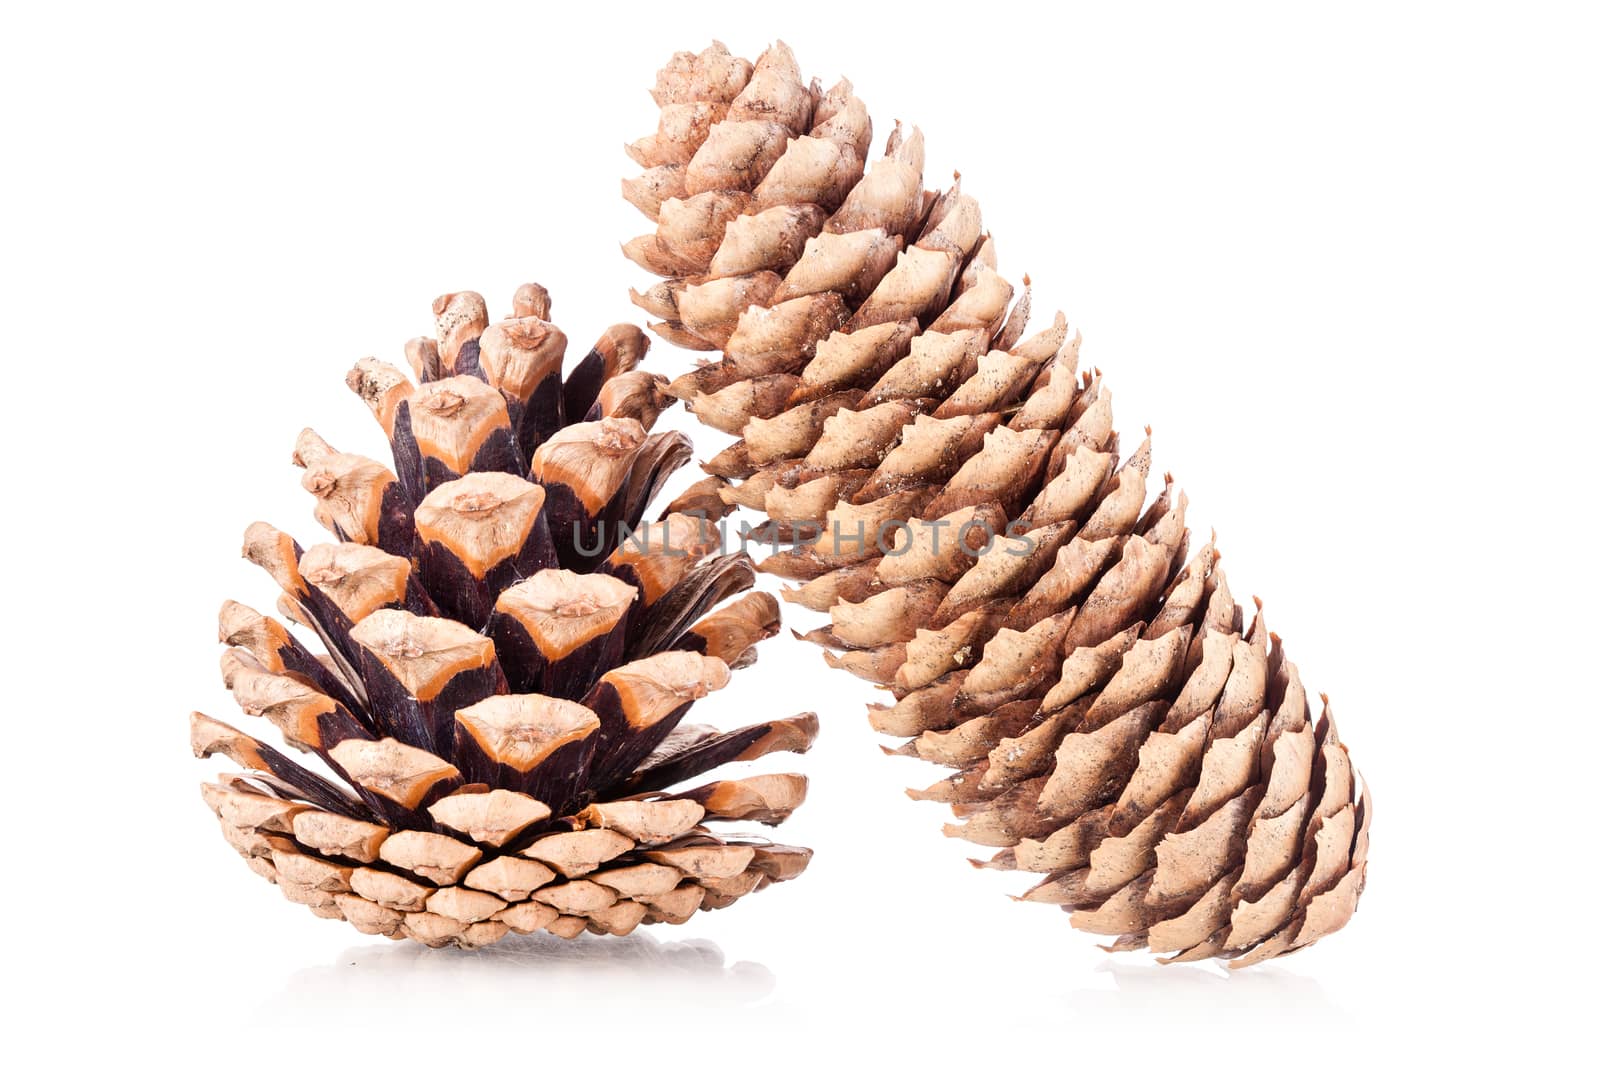 two pinecones isolated on white background